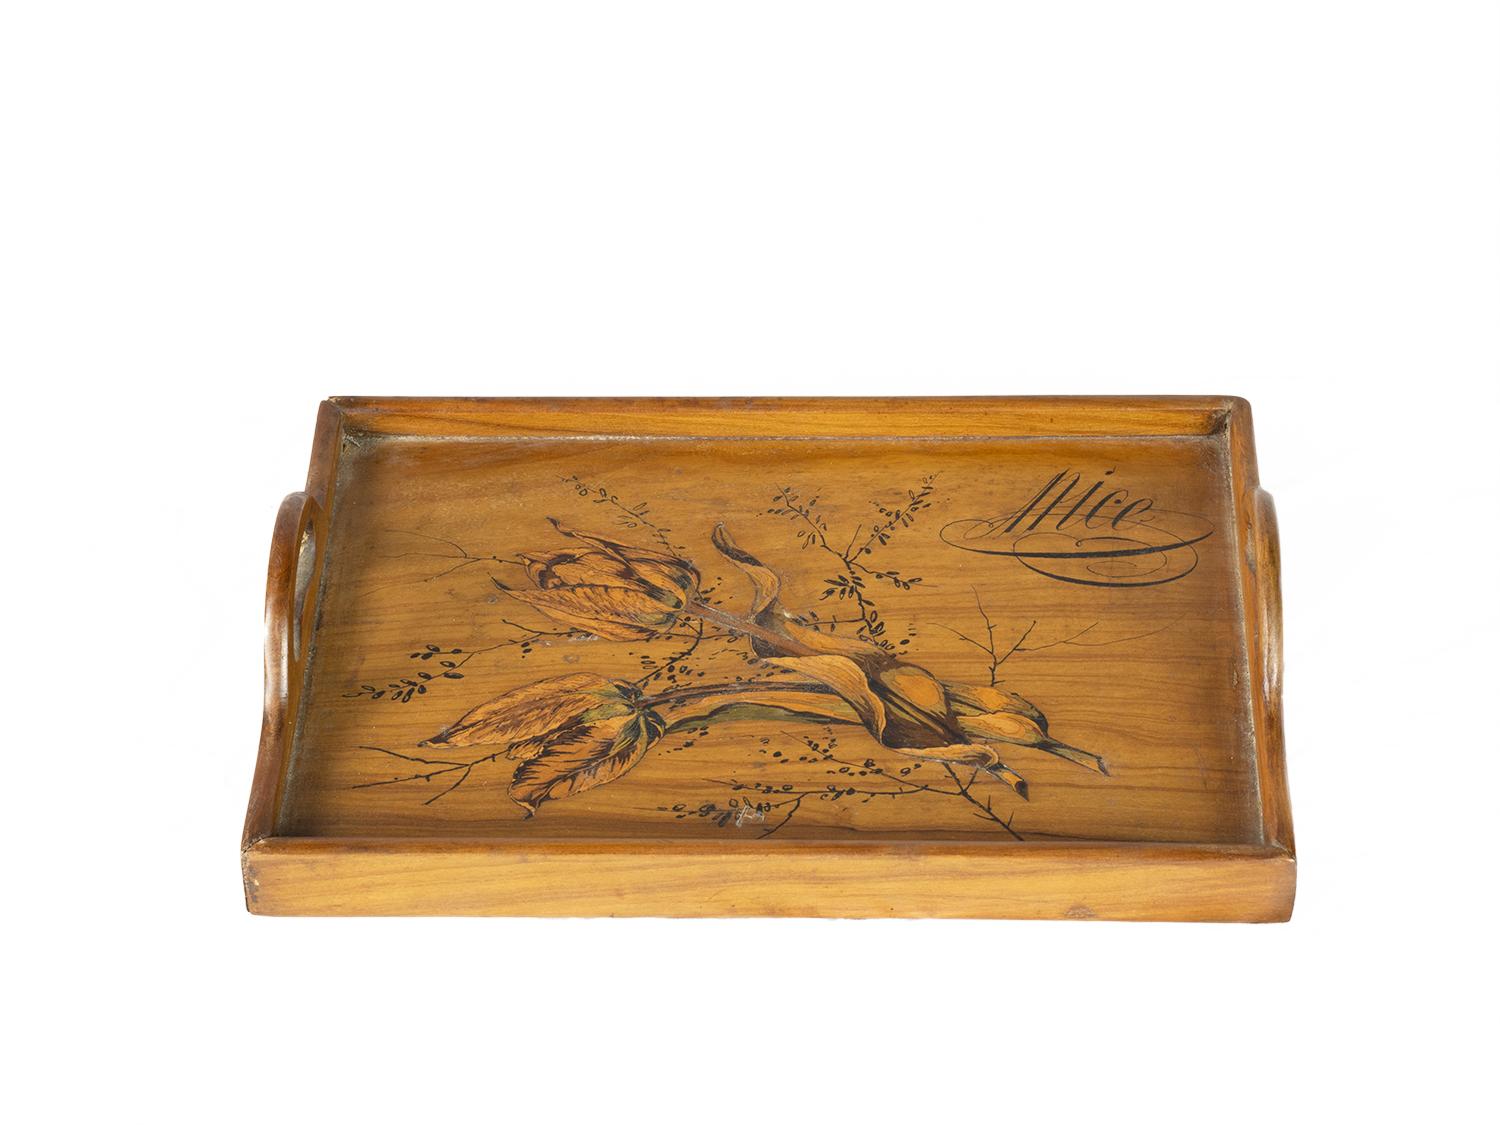 A small rectangular tray with raised edges, flower inlaid marquetry.
”Nice’ marked.